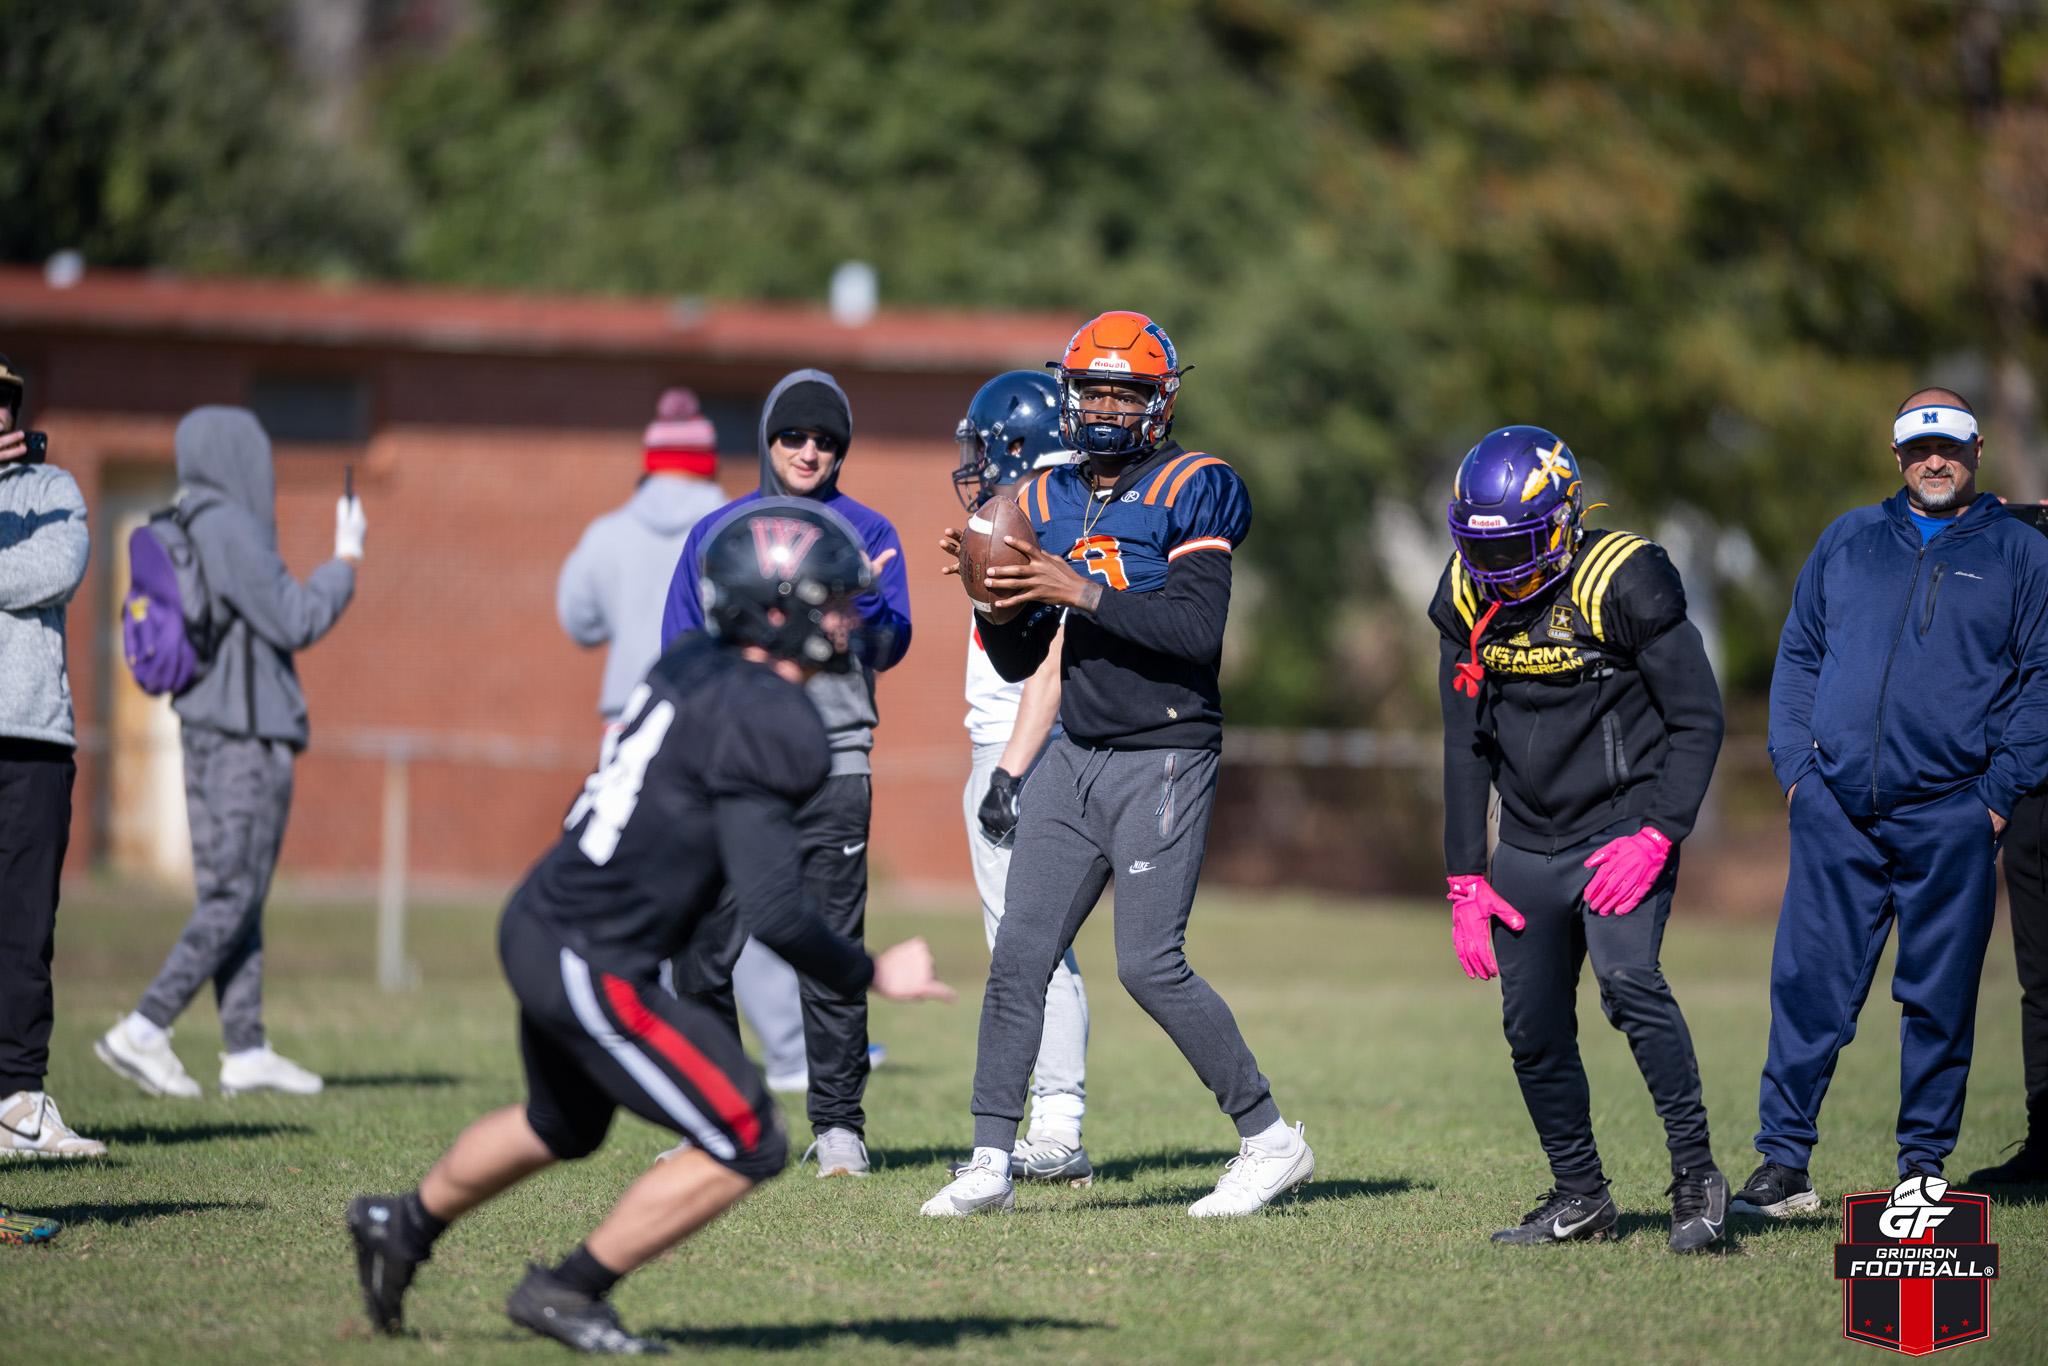 Middle Schoolers and Seniors Get Prepared for Gridiron Football All-American Bowl Games